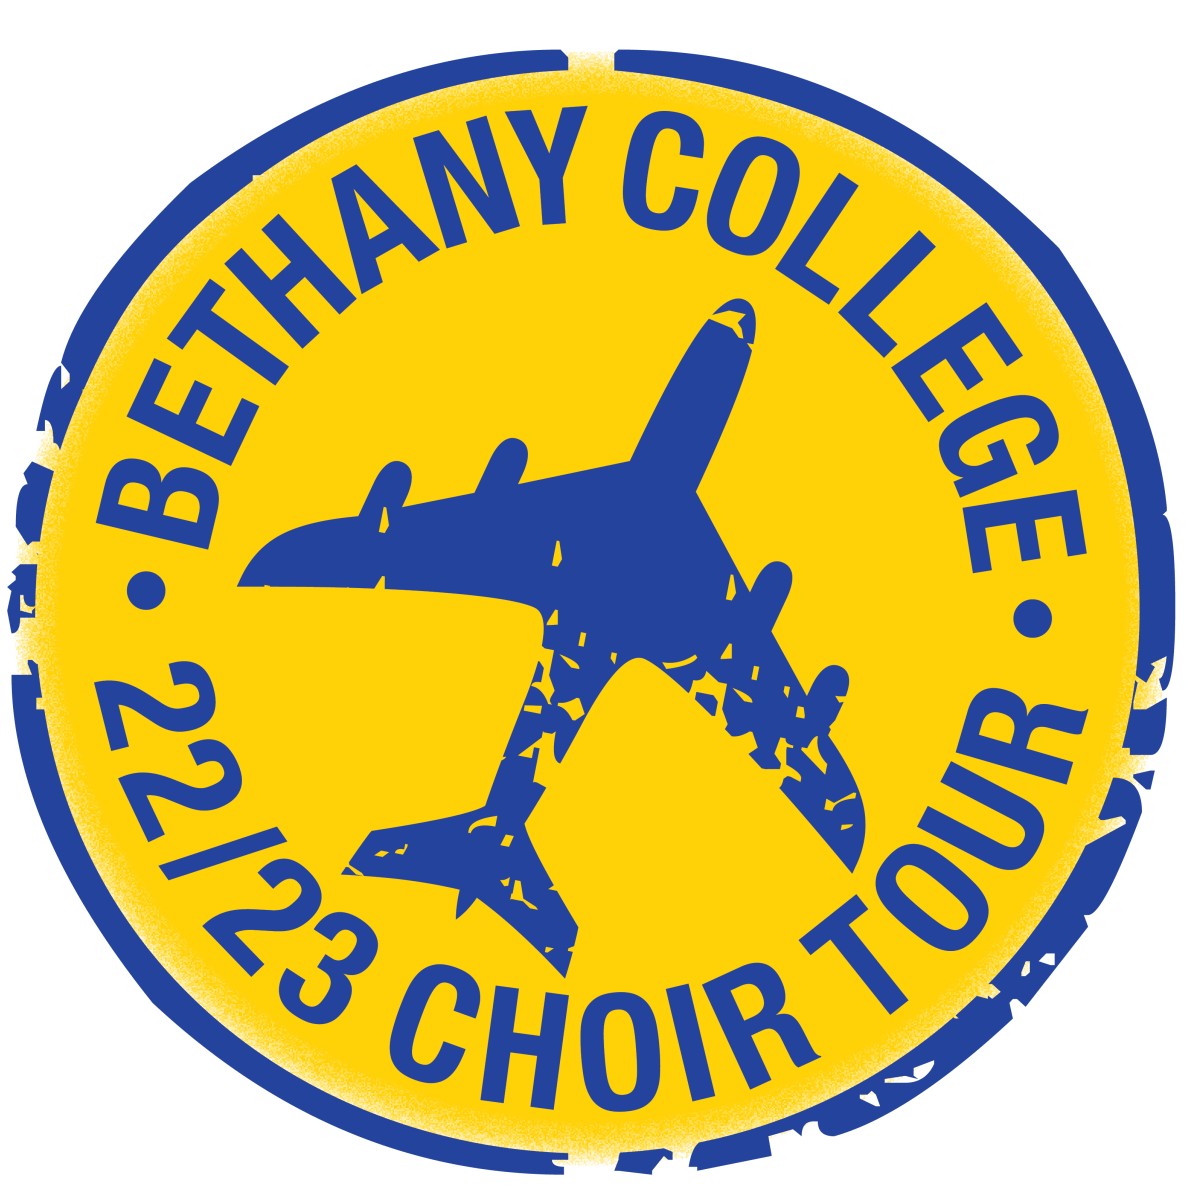 bethany lutheran college choir tour